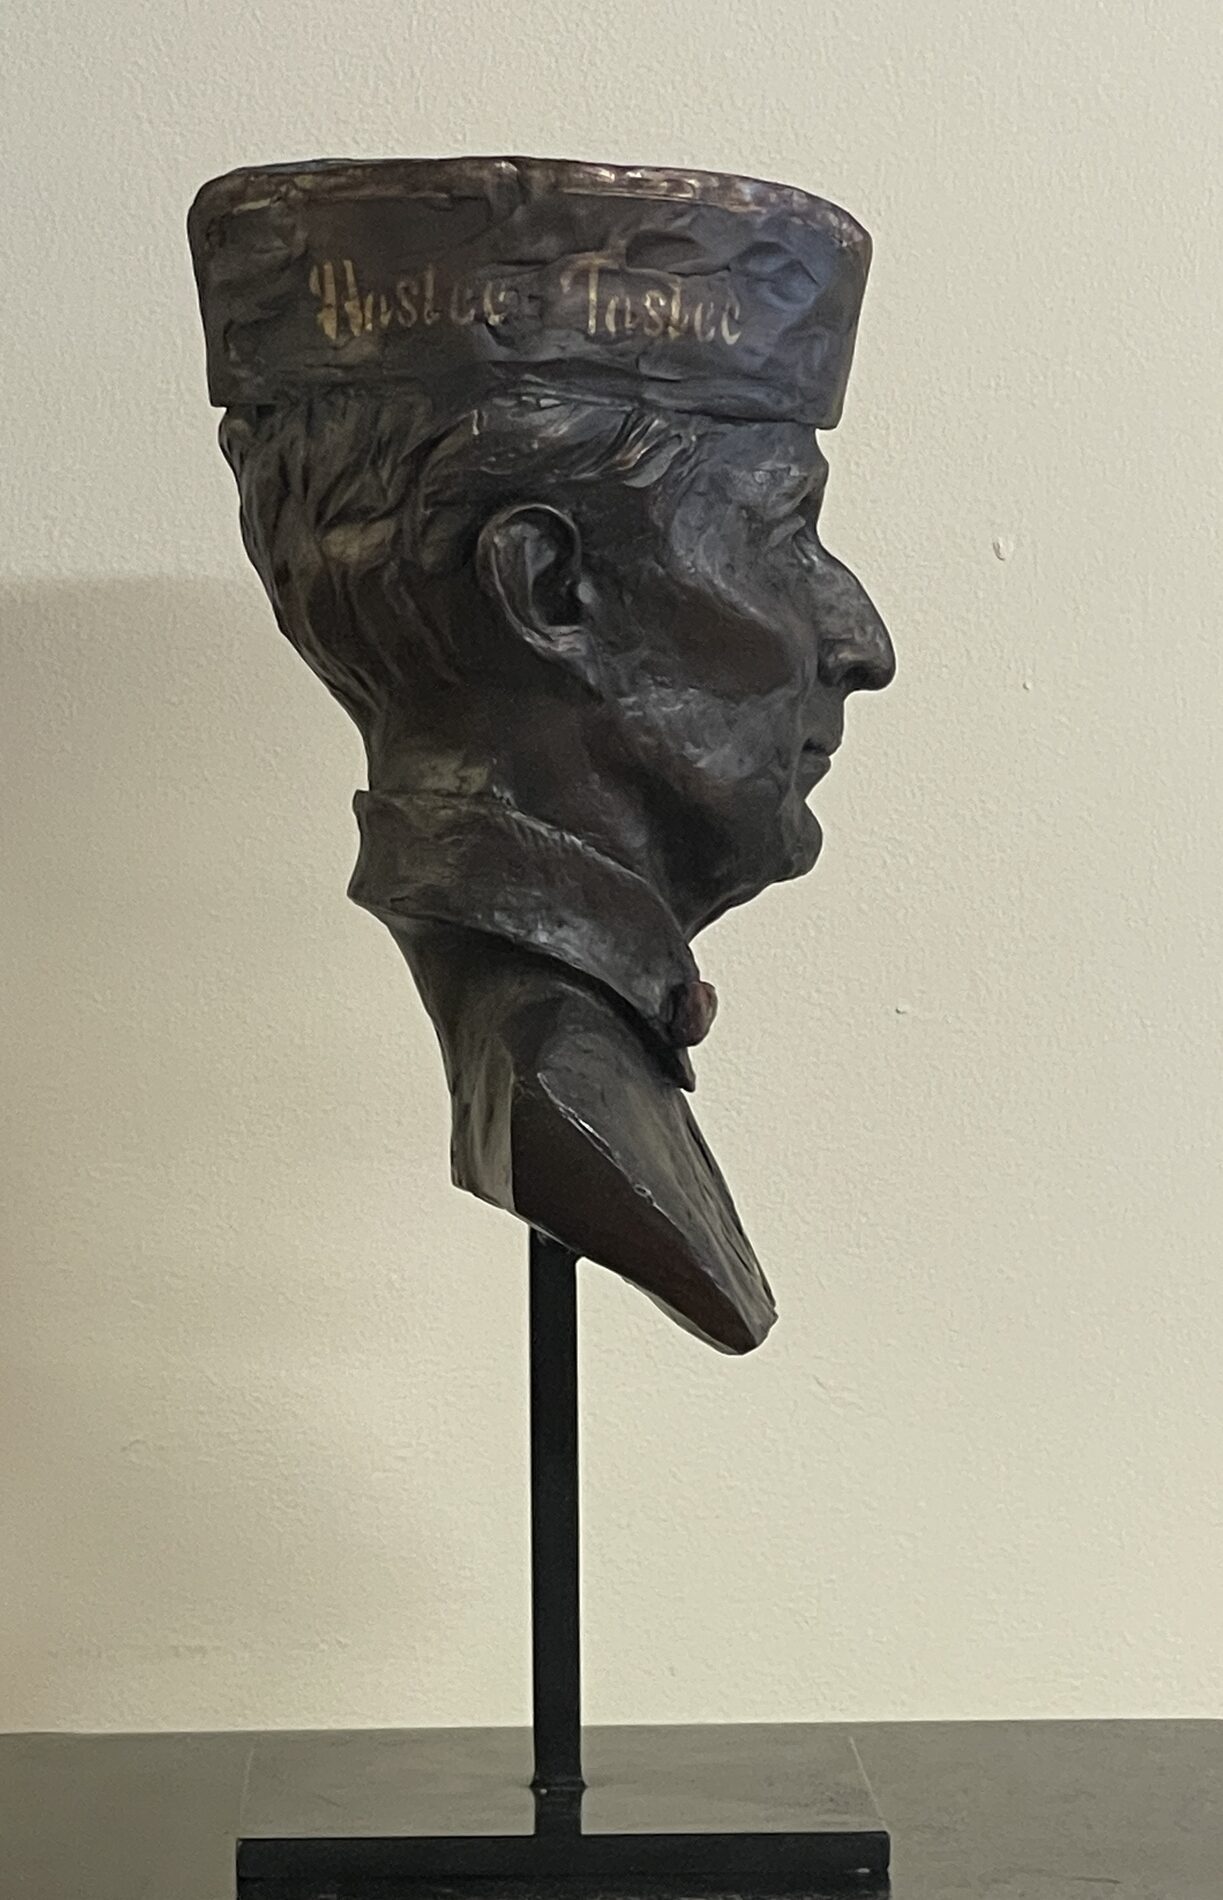 Side view of "Mr. Hastee".